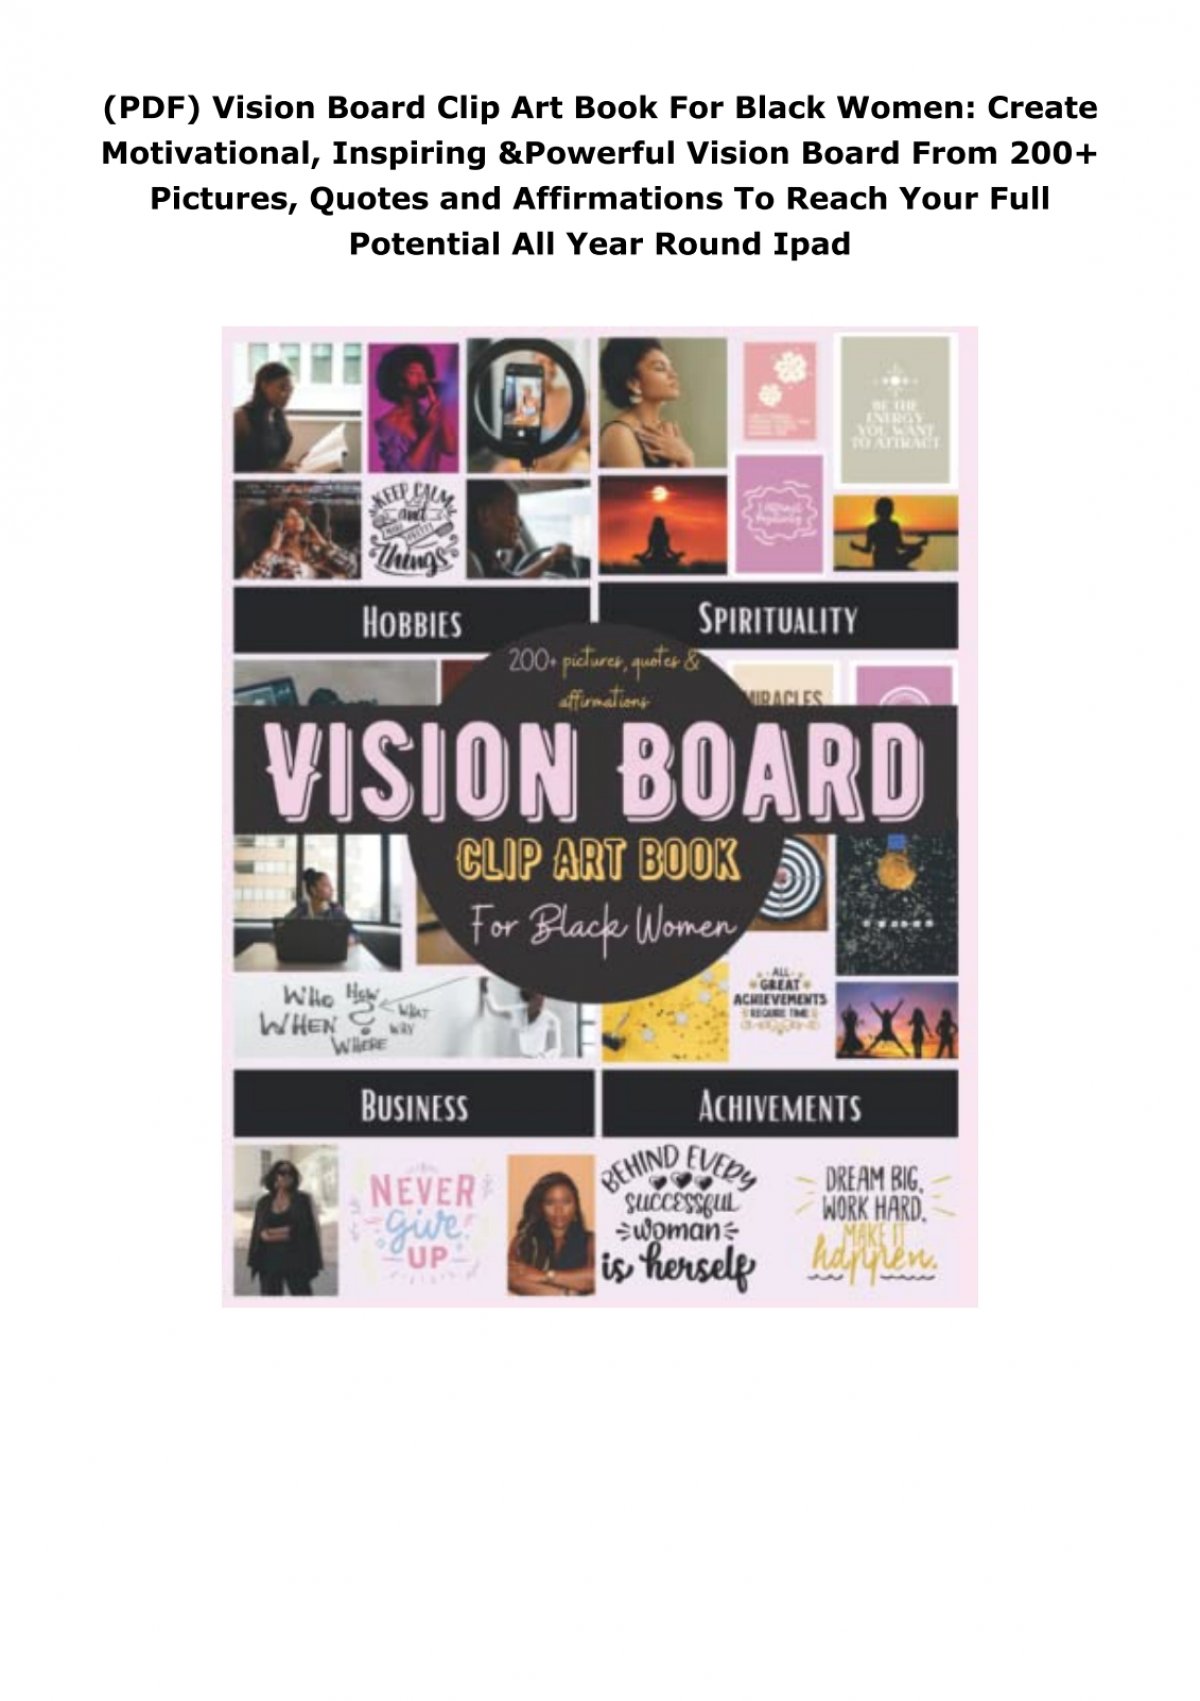 PDF Vision Board Clip Art Book for Black Women: Enjoy 280+ Empowering High  Quality Colorful Pictures, Affirmations & Quotes to Create Your Dream  Life Vision Board (magazine vision board) Free